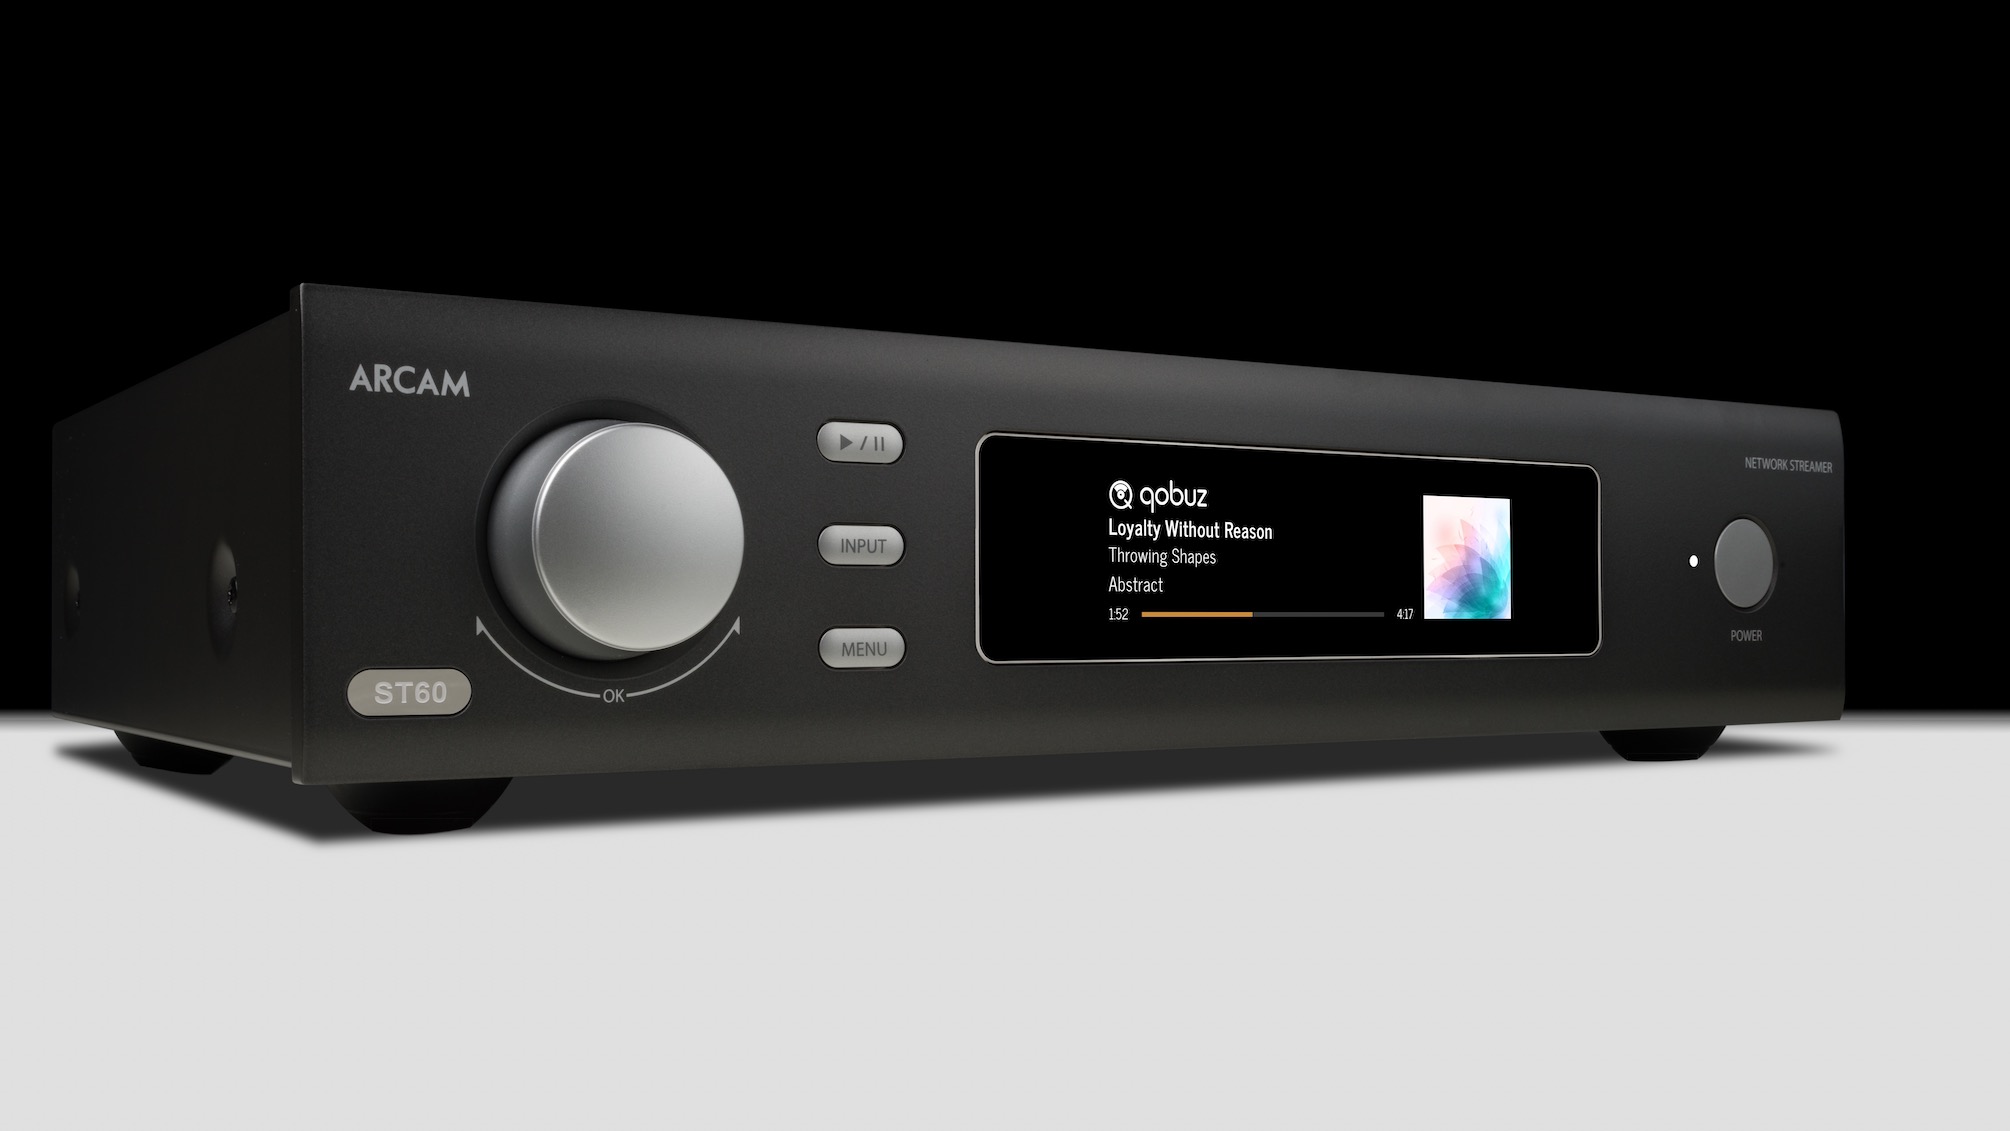 What Hi-Fi? Awards 2021 winner. Arcam’s first-ever dedicated music streamer sets a new benchmark Tested at £1199 / $1500 / AU2495